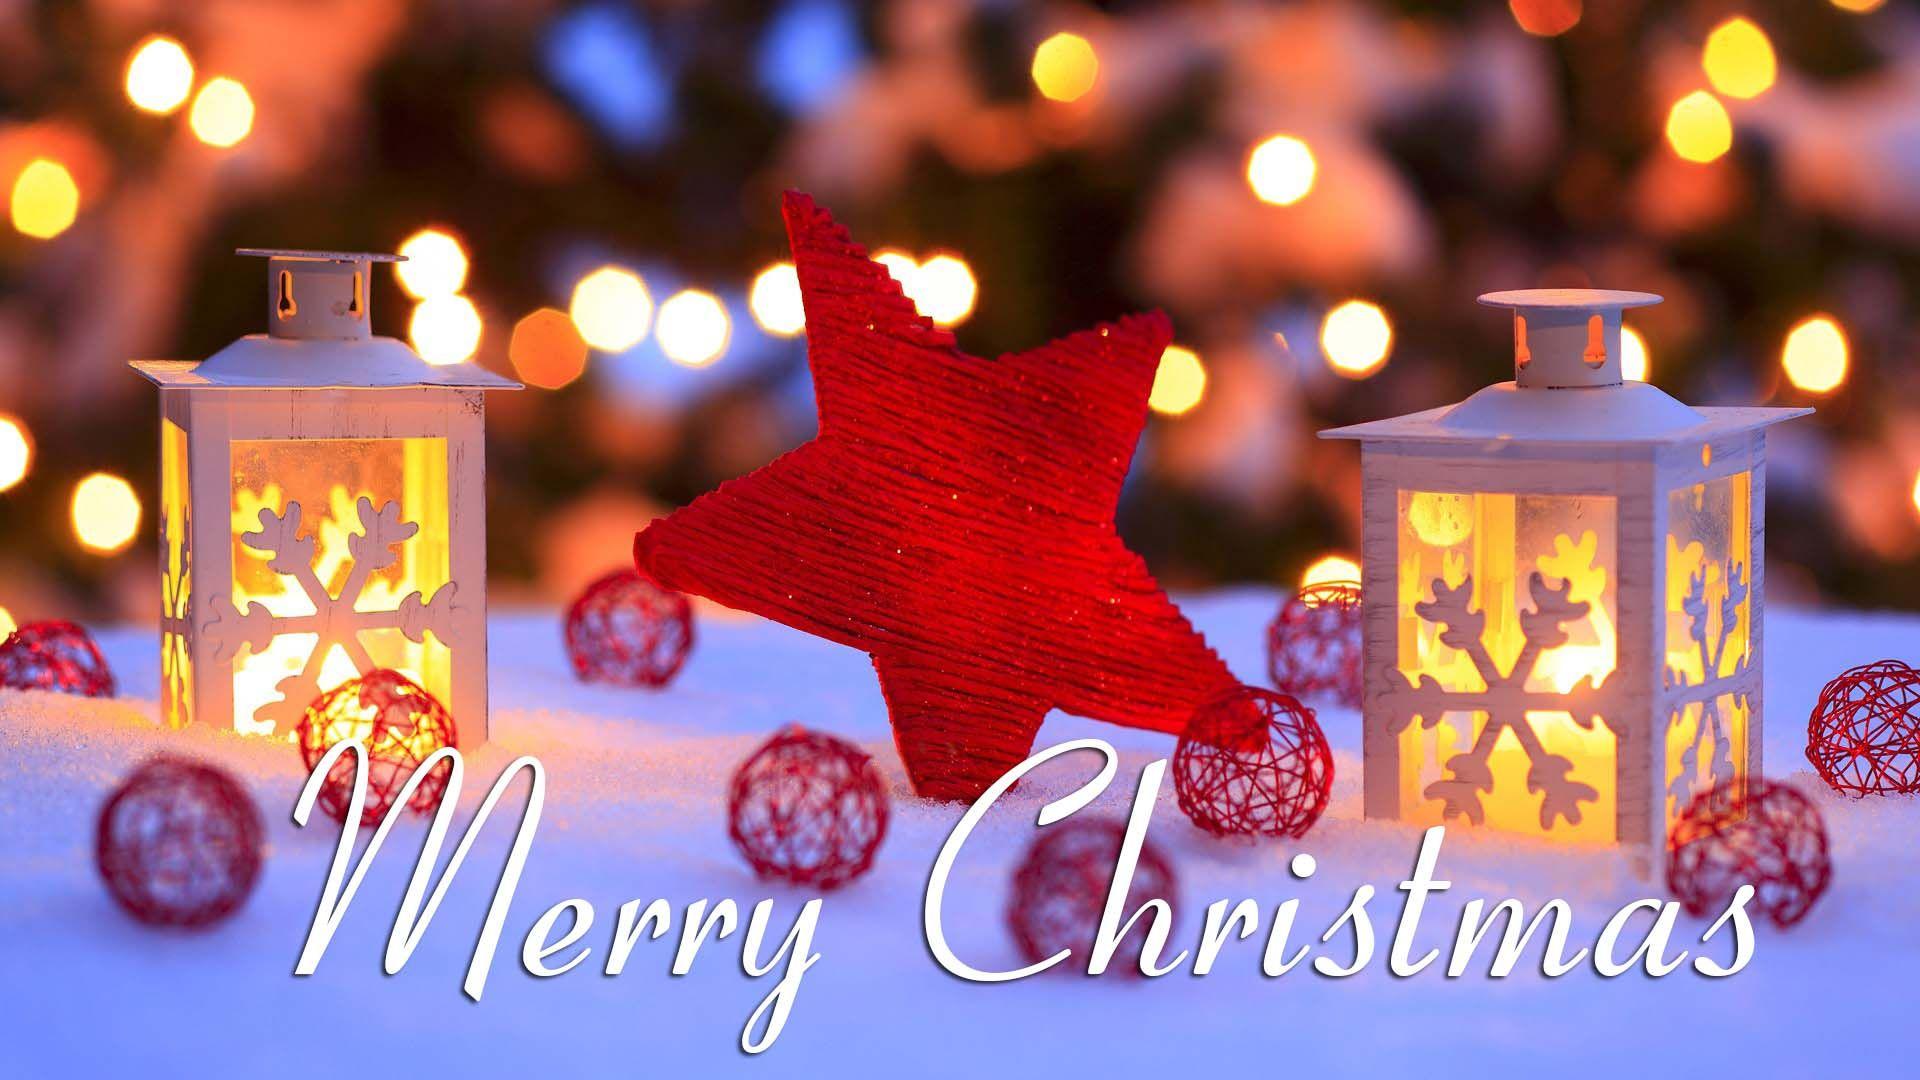 Merry Christmas And Happy New Year Hd Free Wallpaper For Desktop